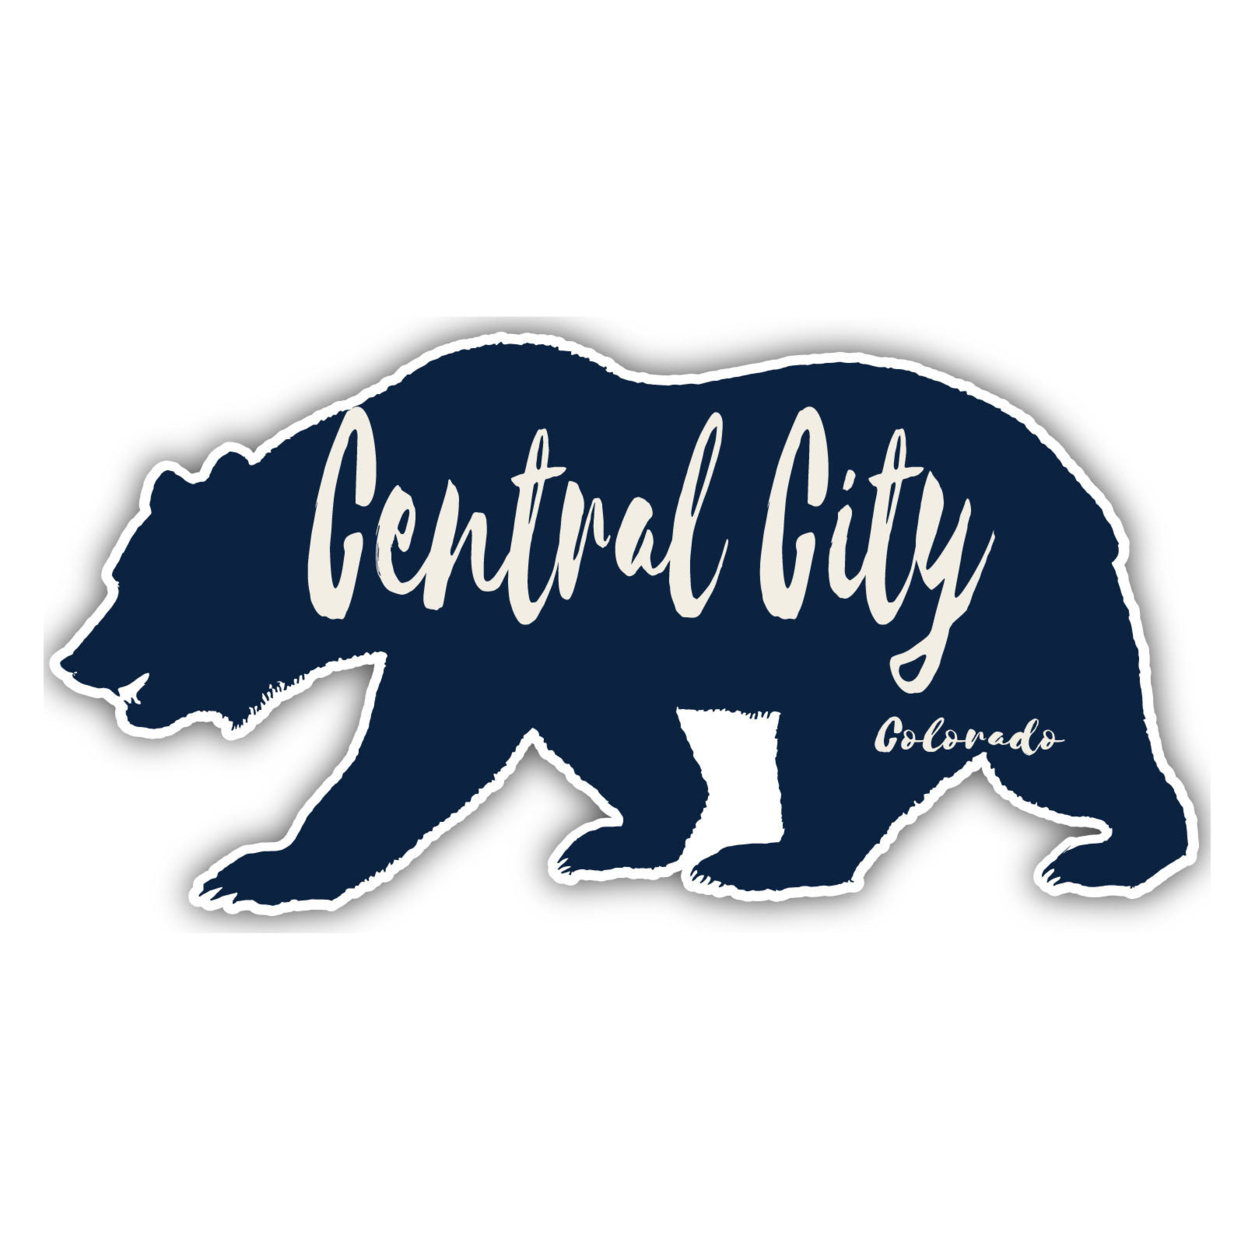 Central City Colorado Souvenir Decorative Stickers (Choose Theme And Size) - 4-Pack, 8-Inch, Tent